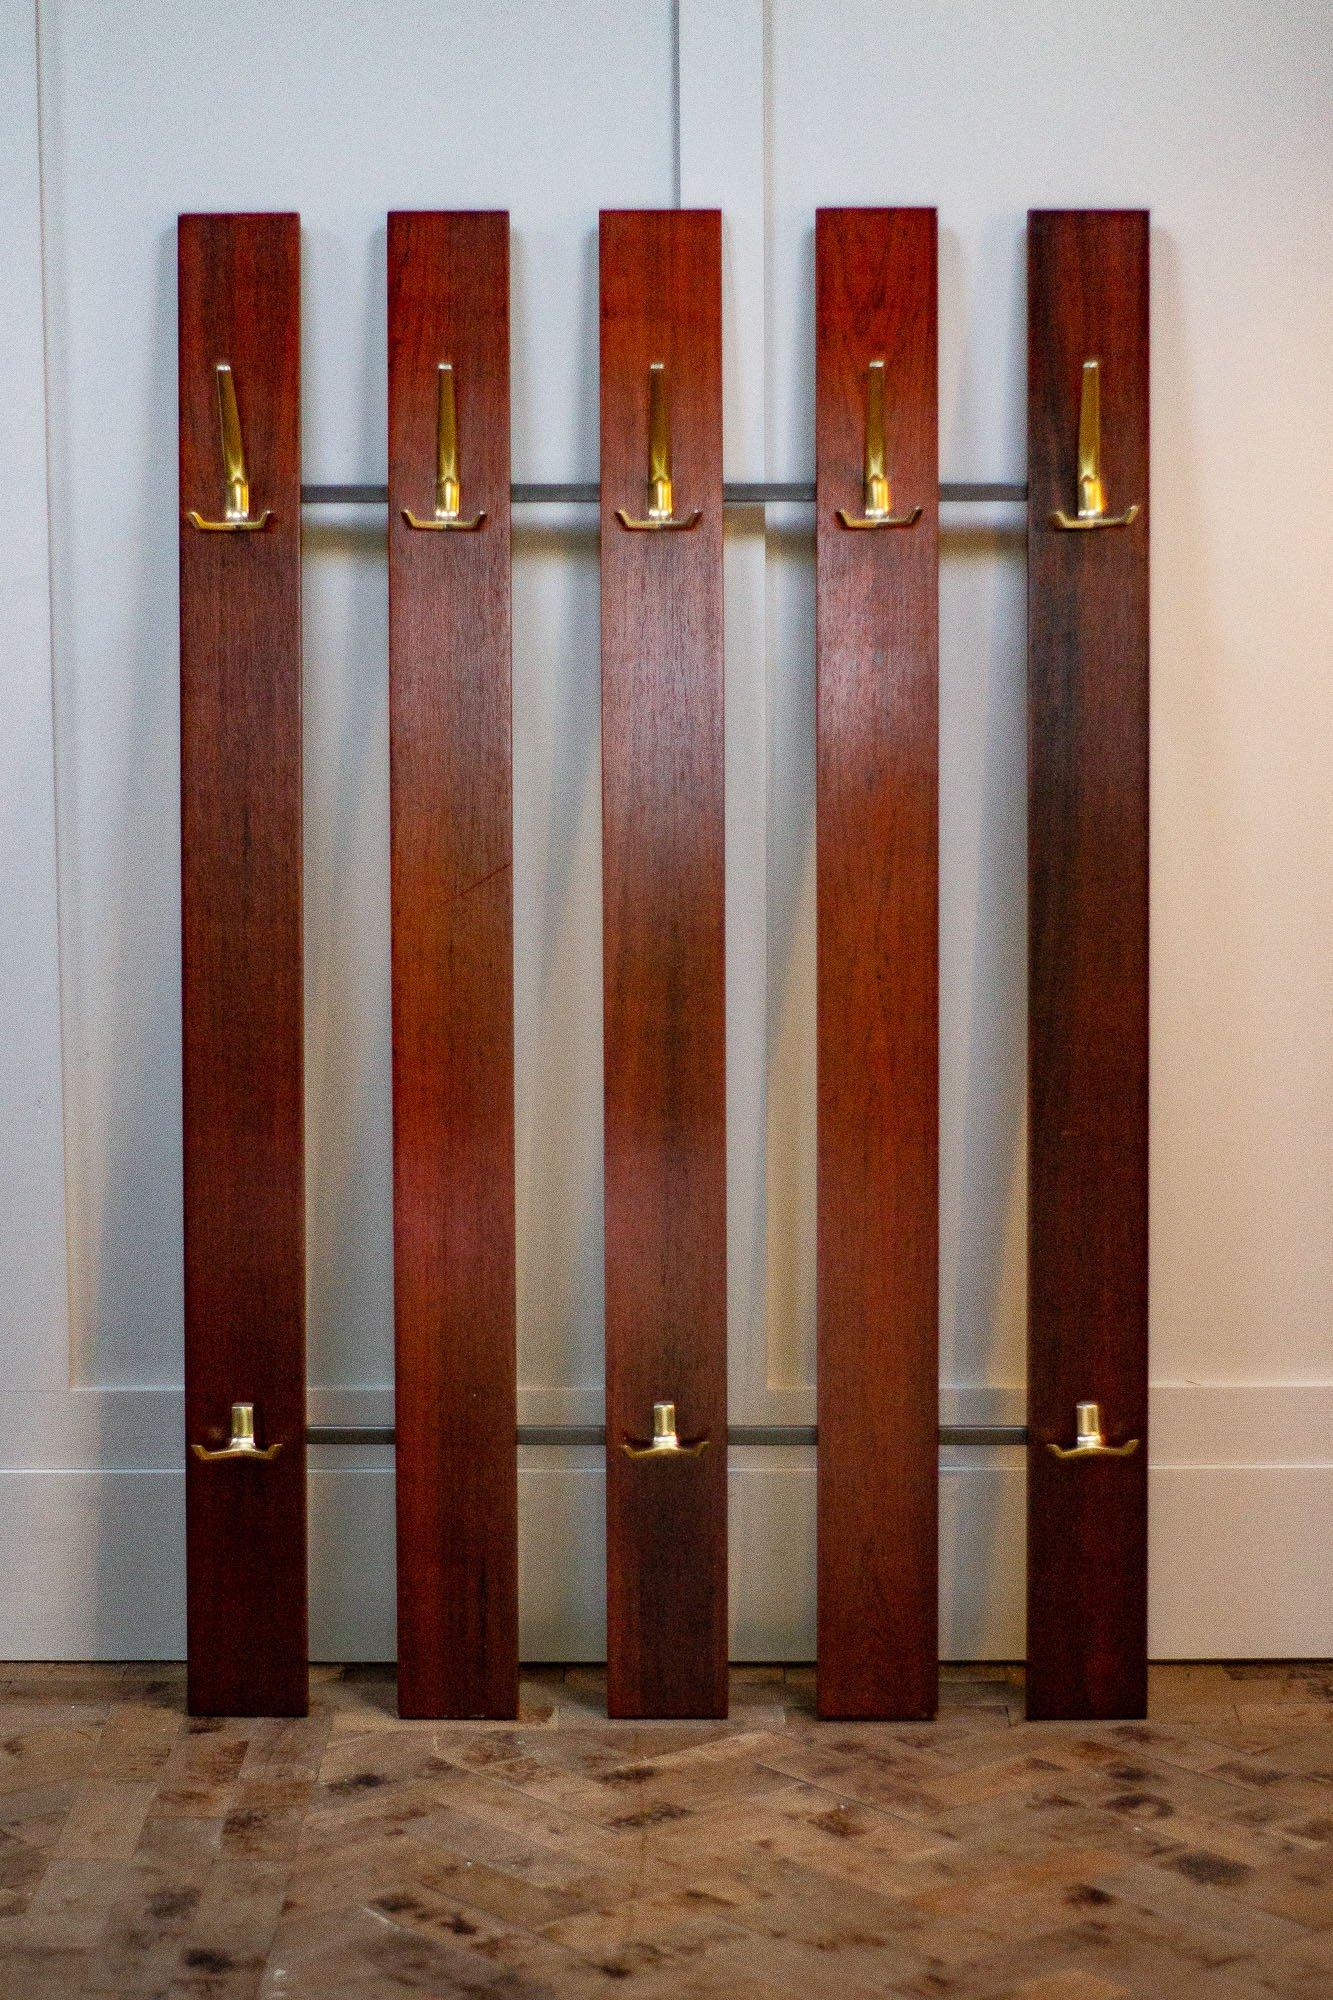 Danish coat rail made of rosewood with beautifully shaped metal hoods and a metal back frame. 

Measures: Height - 125cm

Width - 81cm

Depth - 13cm.